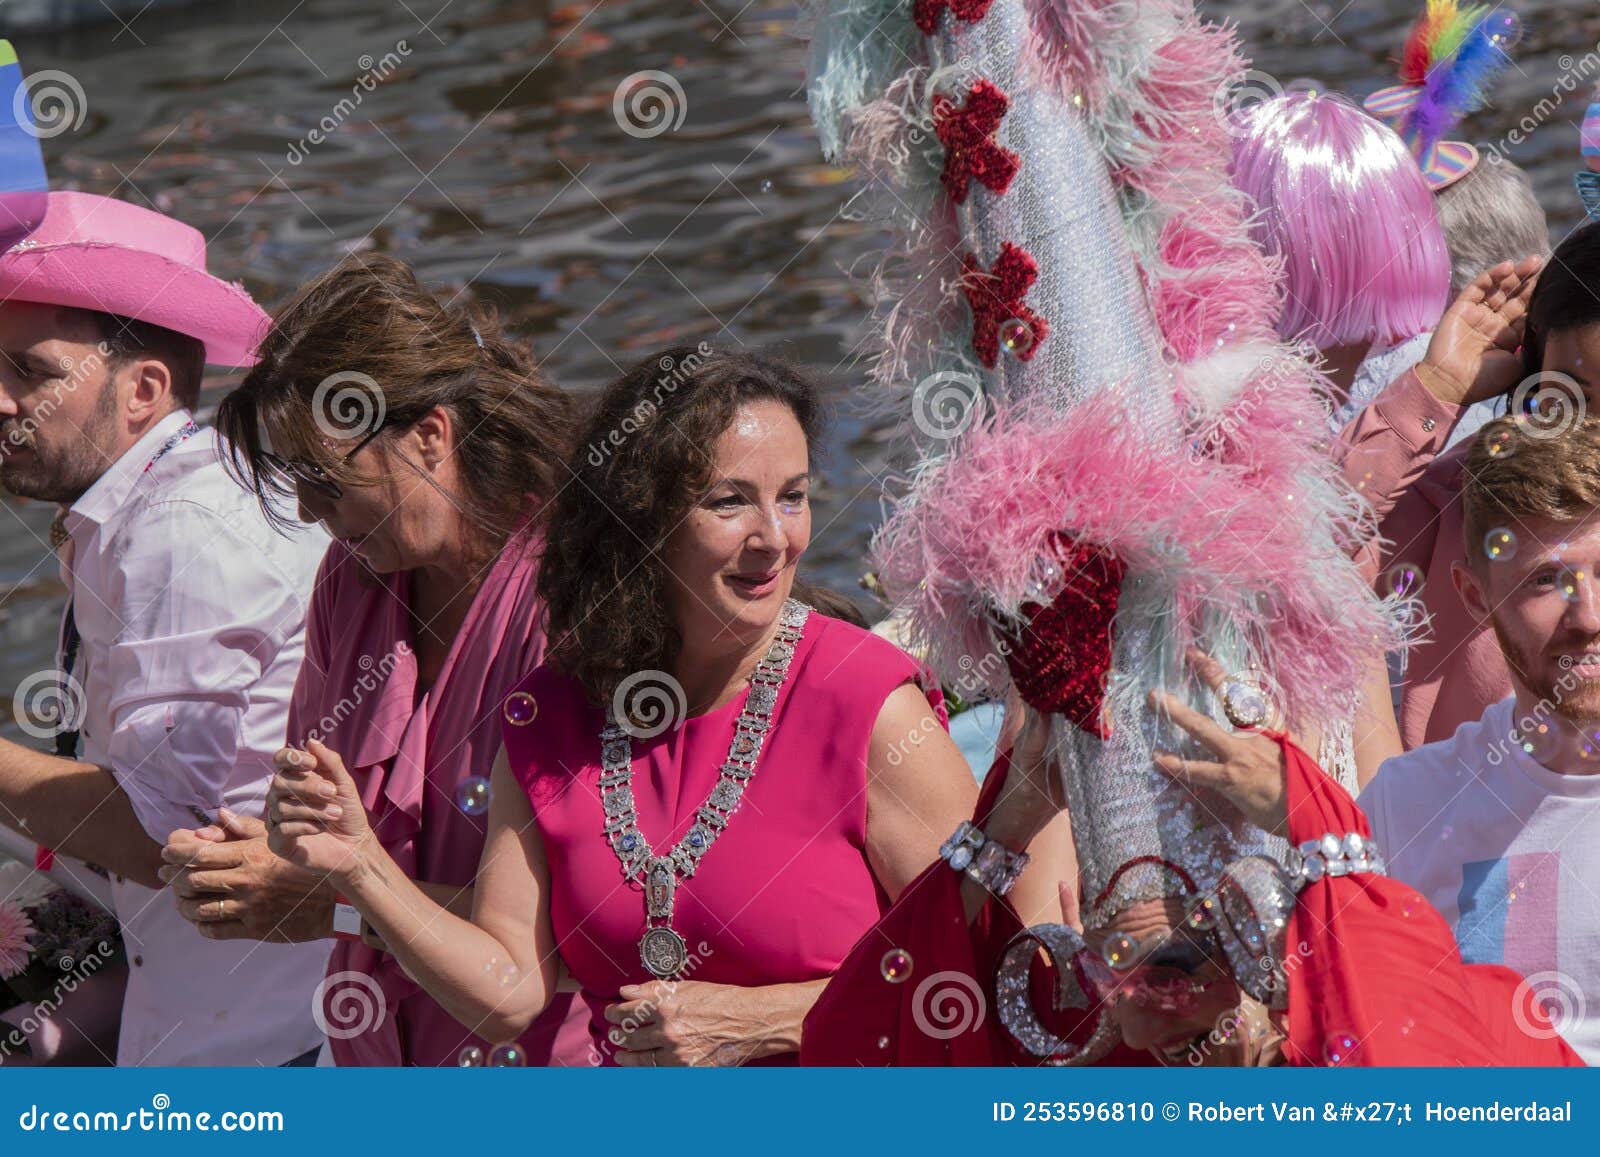 Femke Halseman On The Gemeente Amsterdam Boat At The Gaypride Canal Parade With Boats At